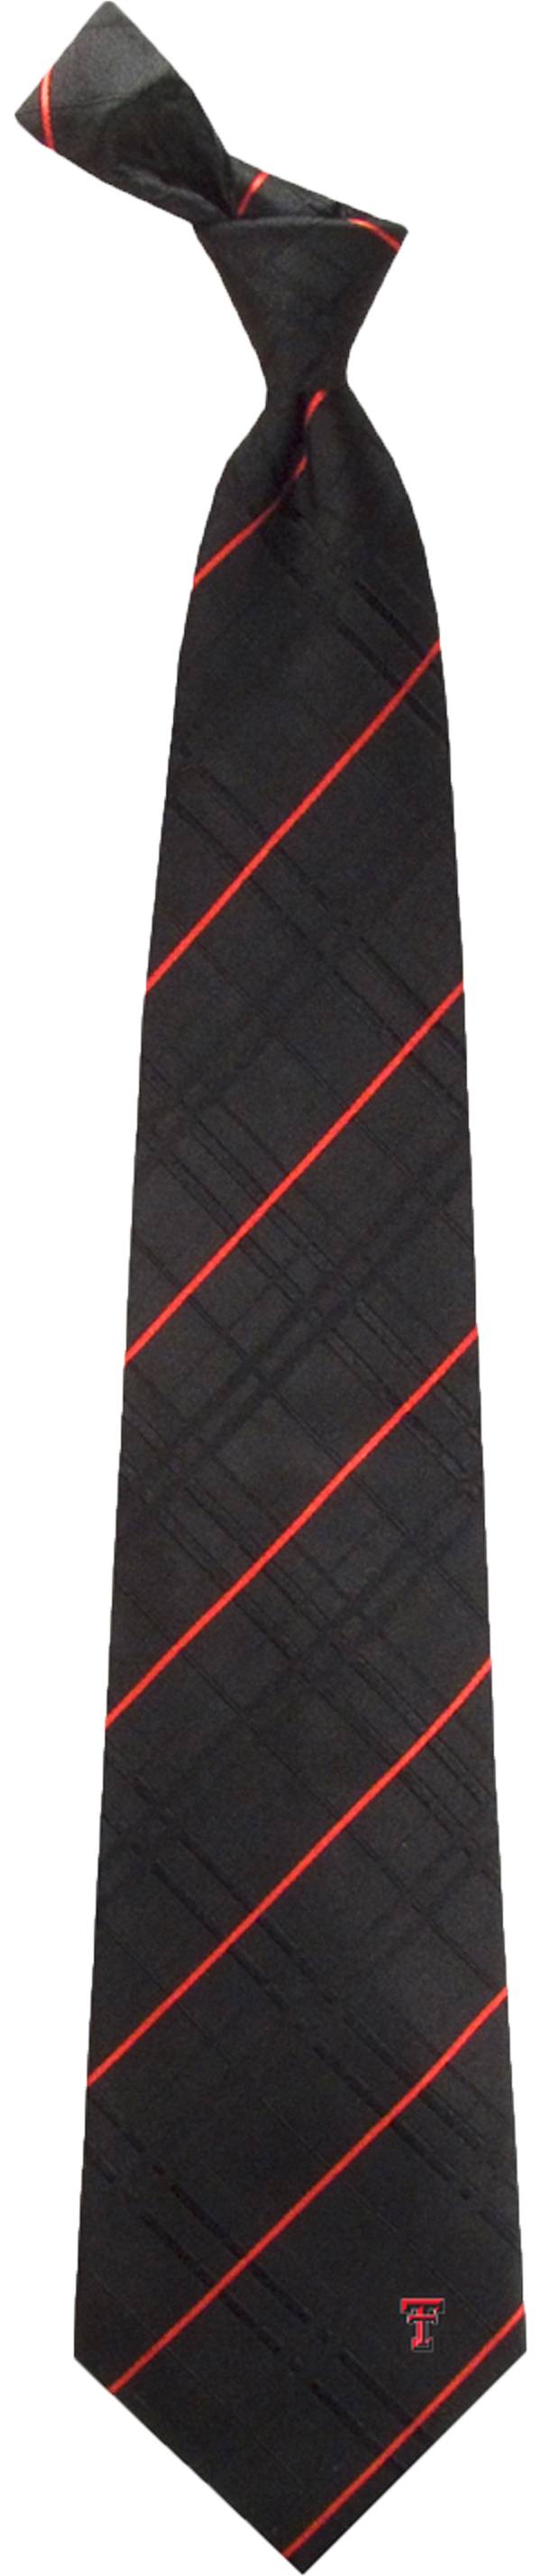 Eagles Wings Texas Tech Red Raiders Woven Oxford Necktie product image